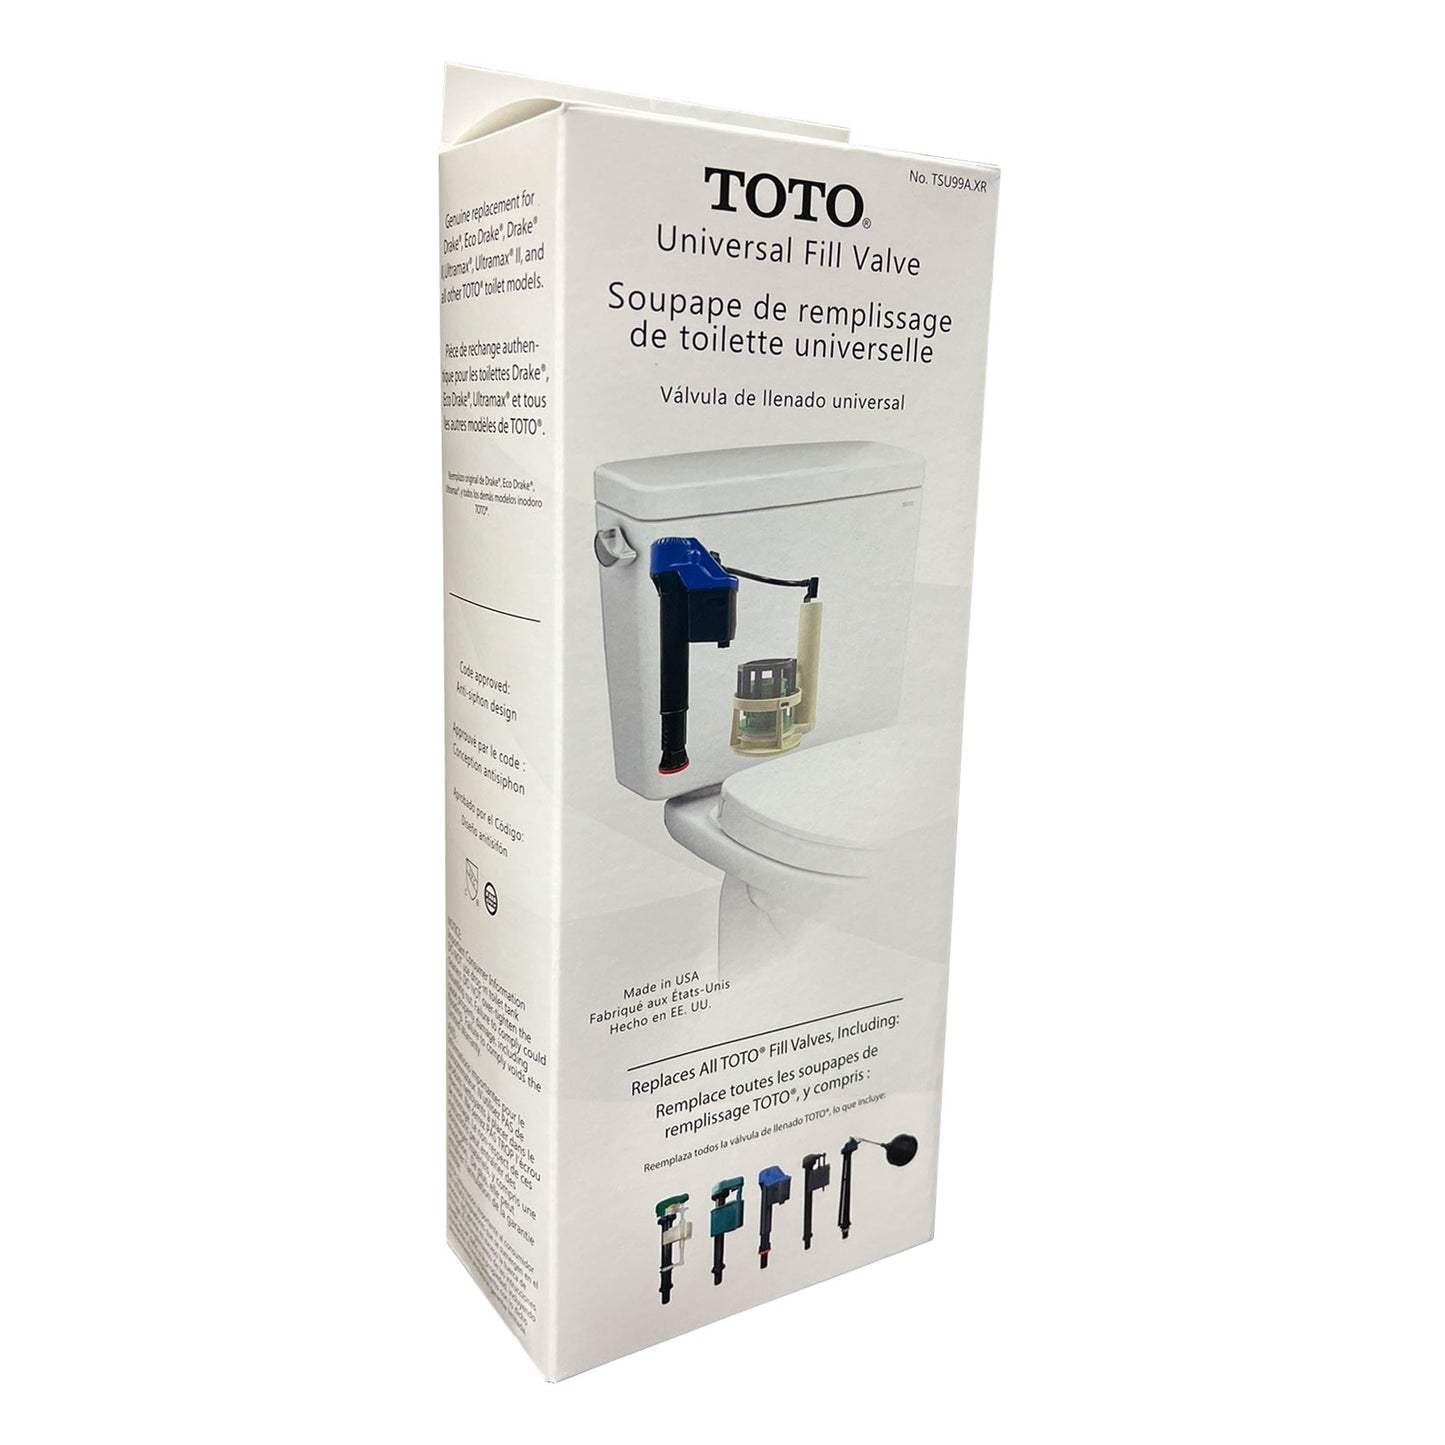 Toto TSU99A.X - Adjustable Replacement Universal Fill Valve Assembly for Toilet Tanks